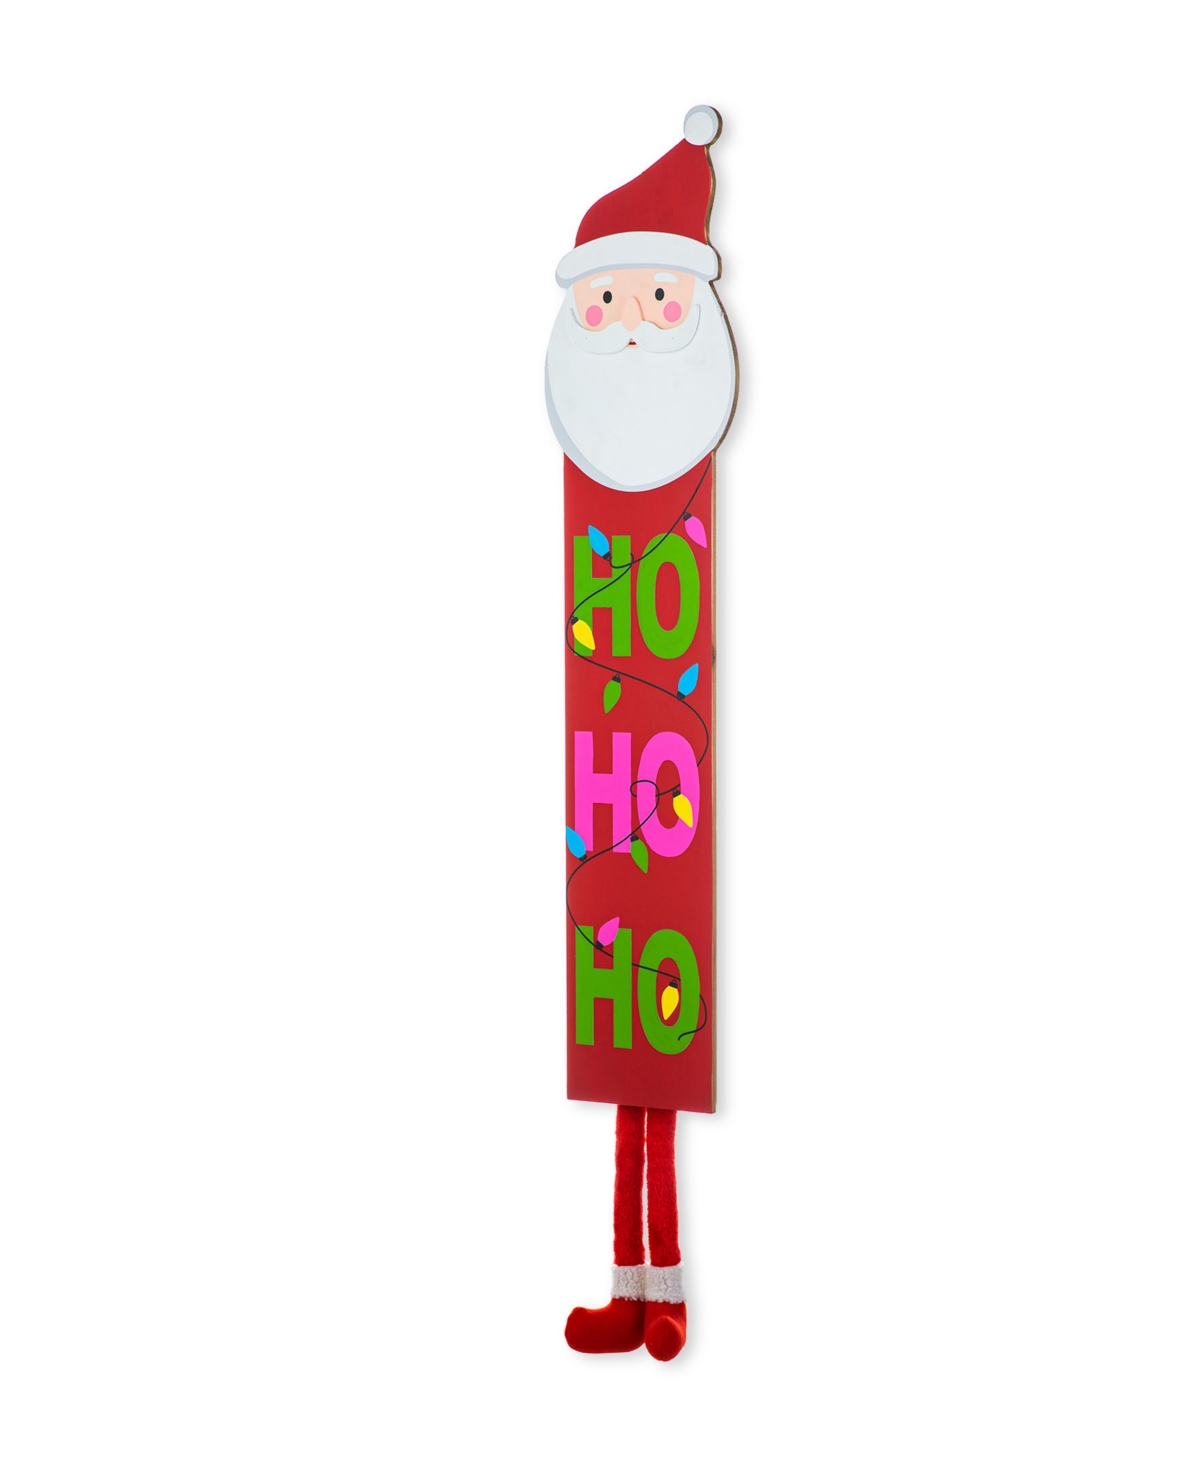 54"H Christmas Wooden "Hohoho" Santa Porch Sign with Fabric Dangling Legs - MULTI